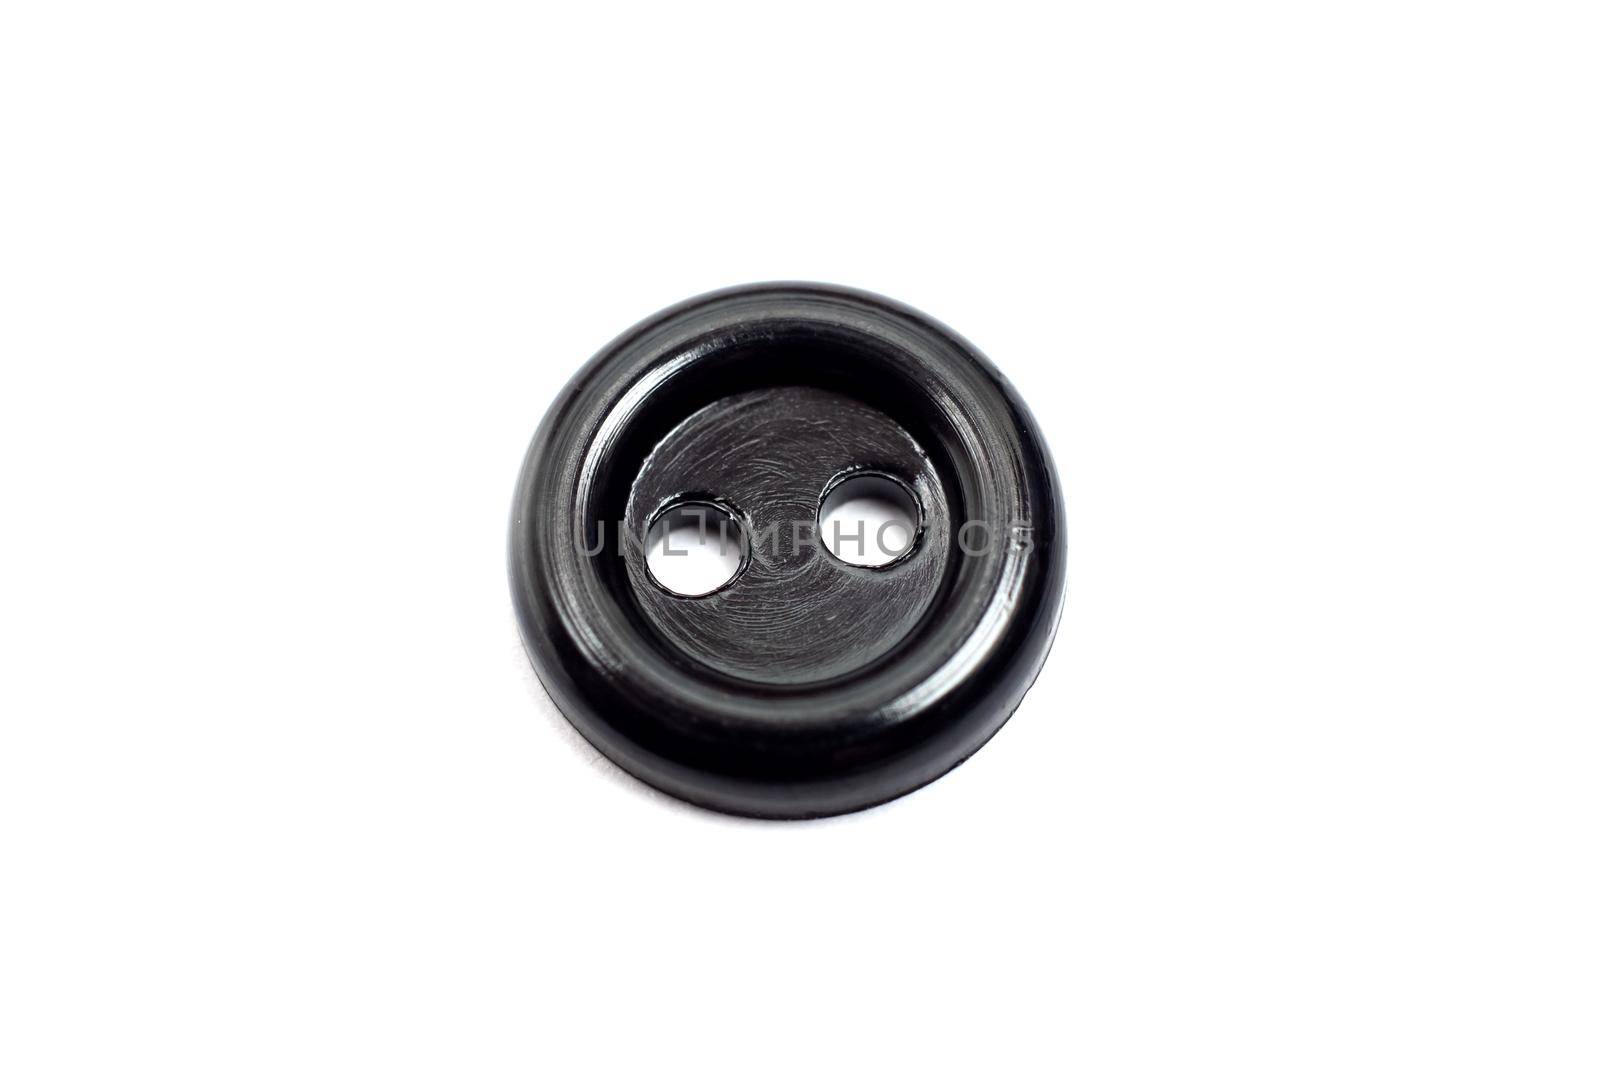 One black plastic button close up, isolate on white background